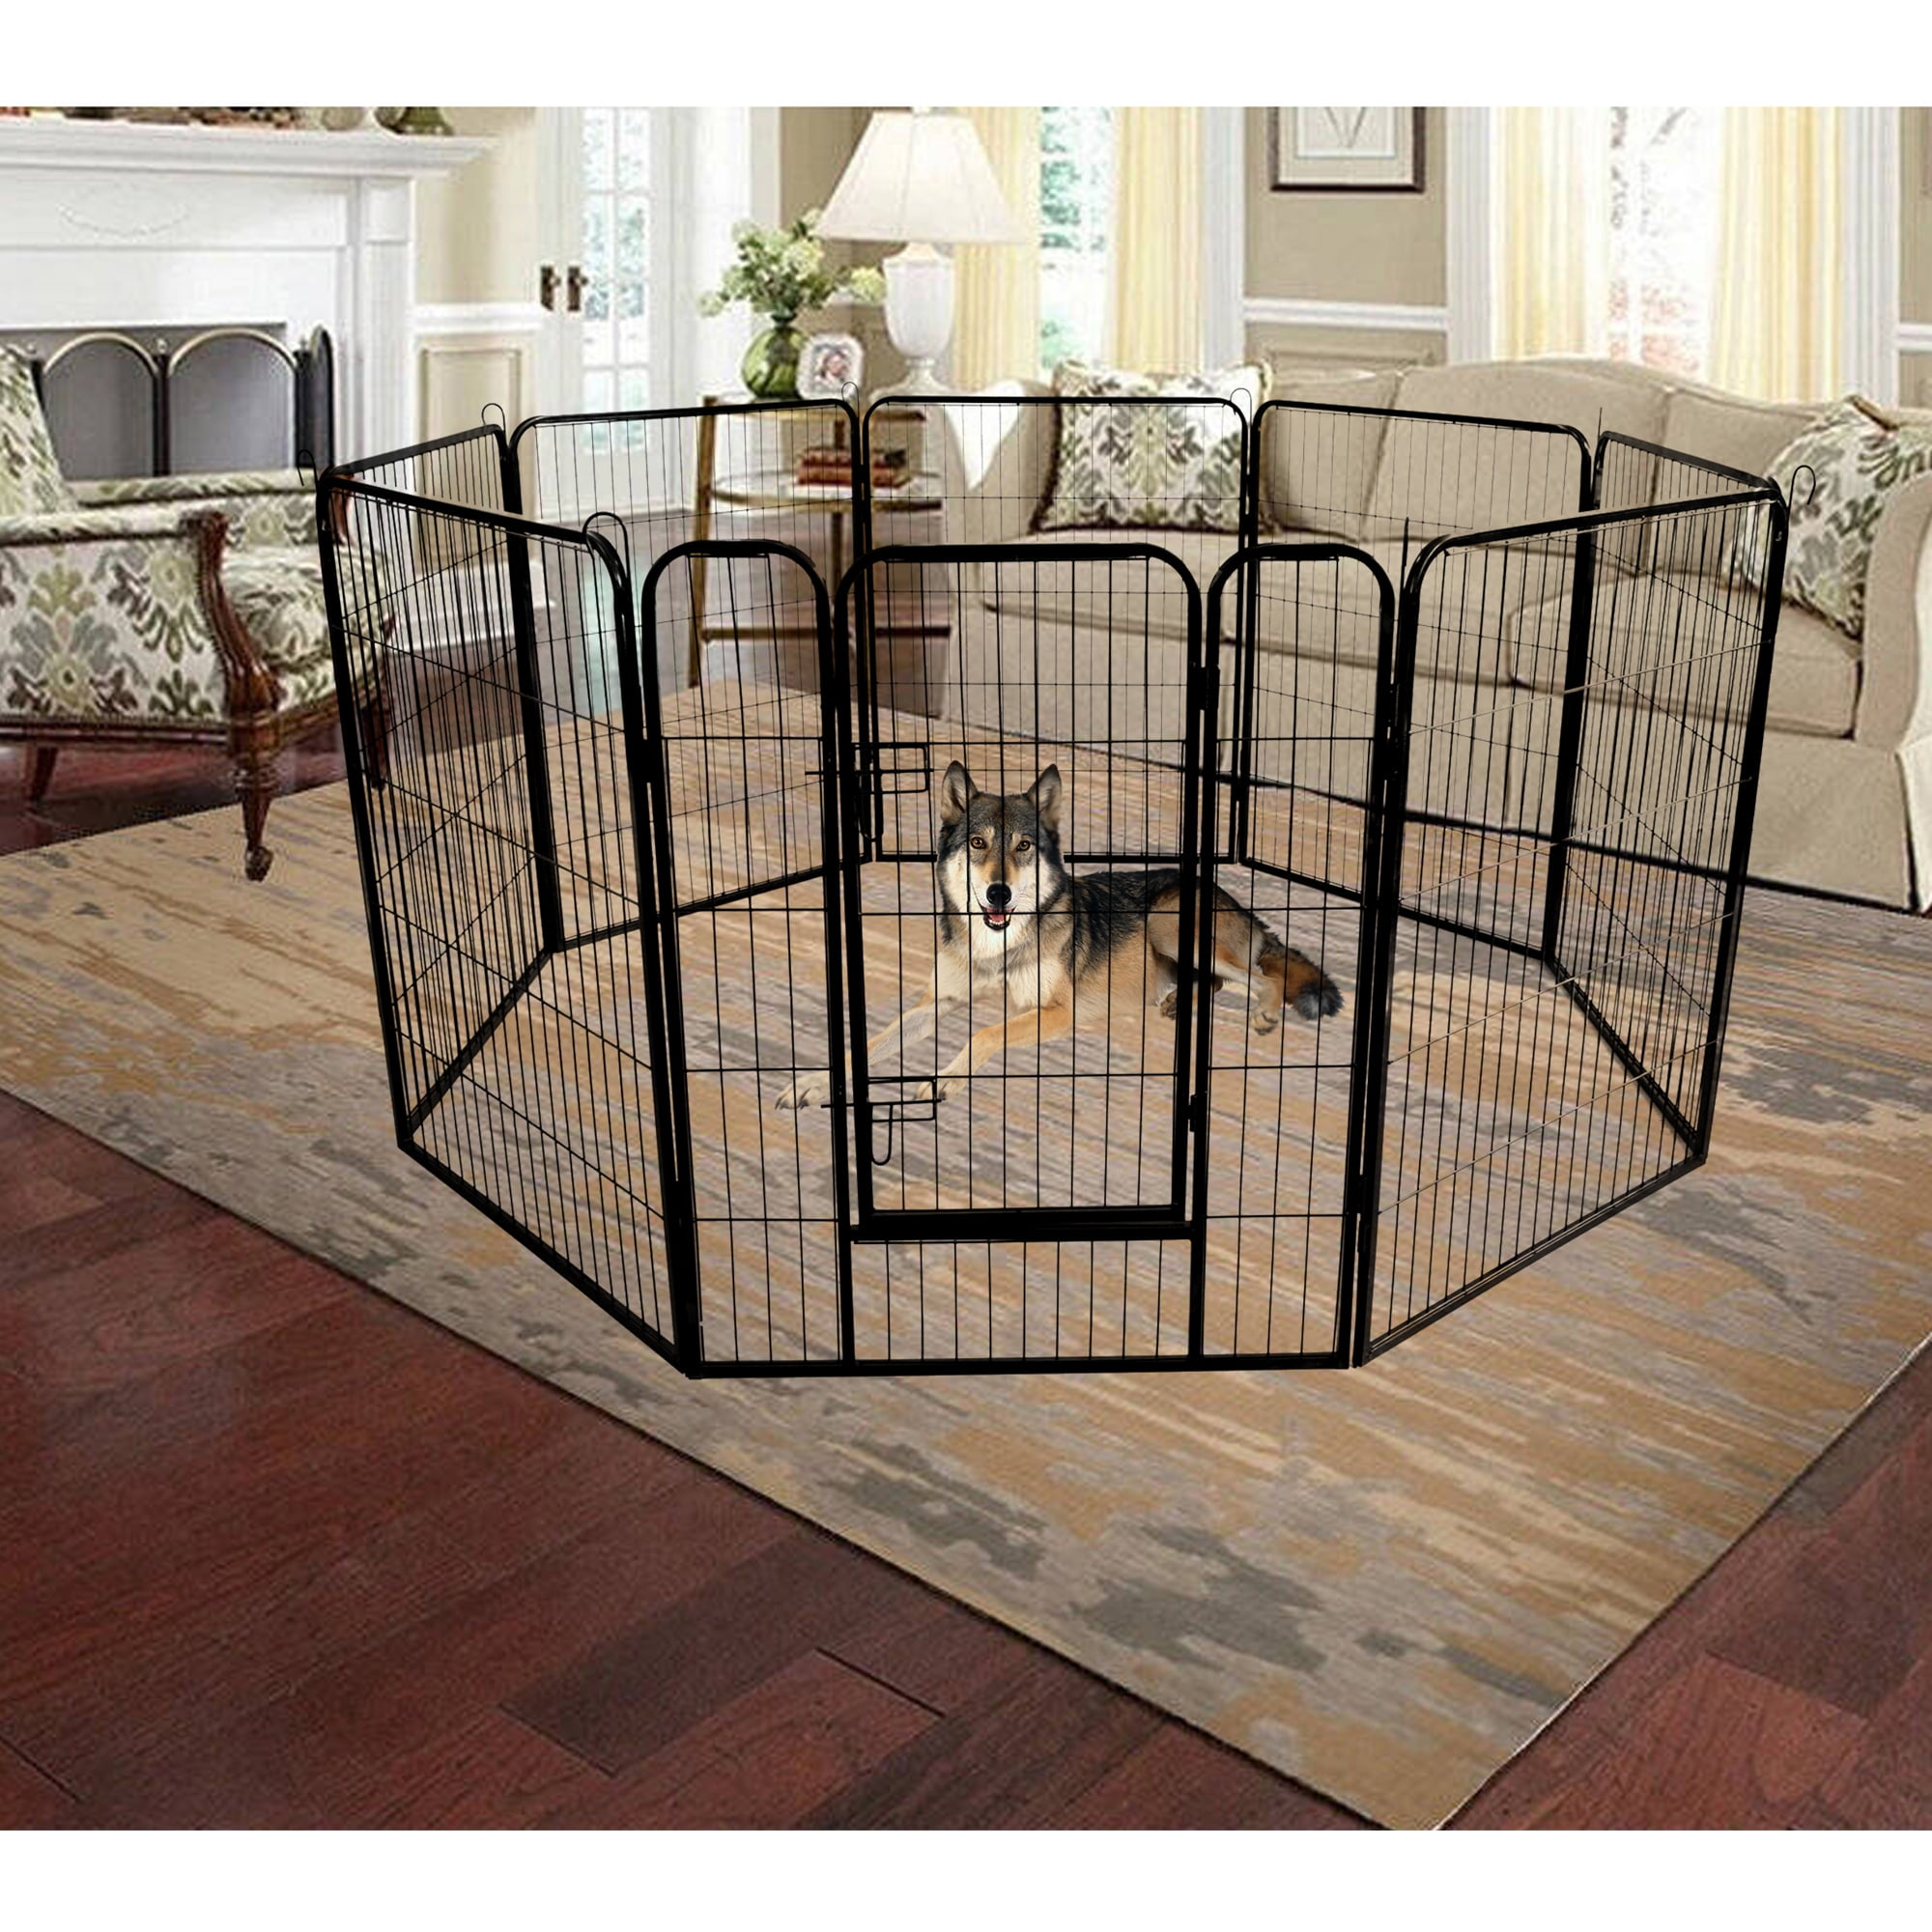 Heavy Duty Foldable Metal Indoor Outdoor Exercise Pet Fence Barrier Playpen  Kennel for Dogs Cats